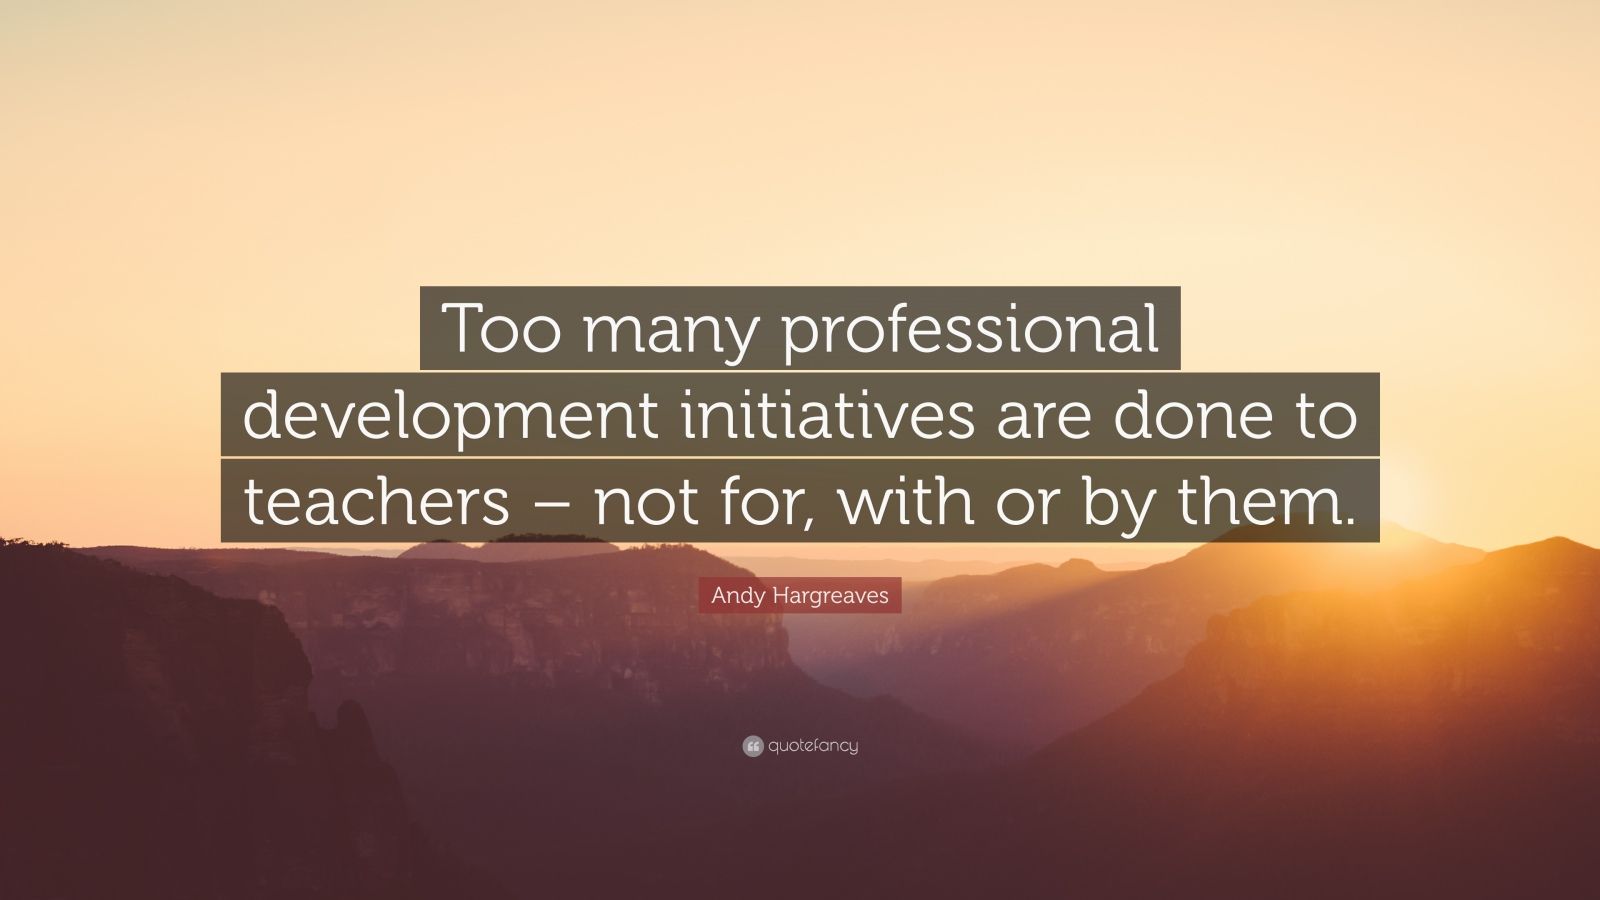 Andy Hargreaves Quote: “Too many professional development initiatives